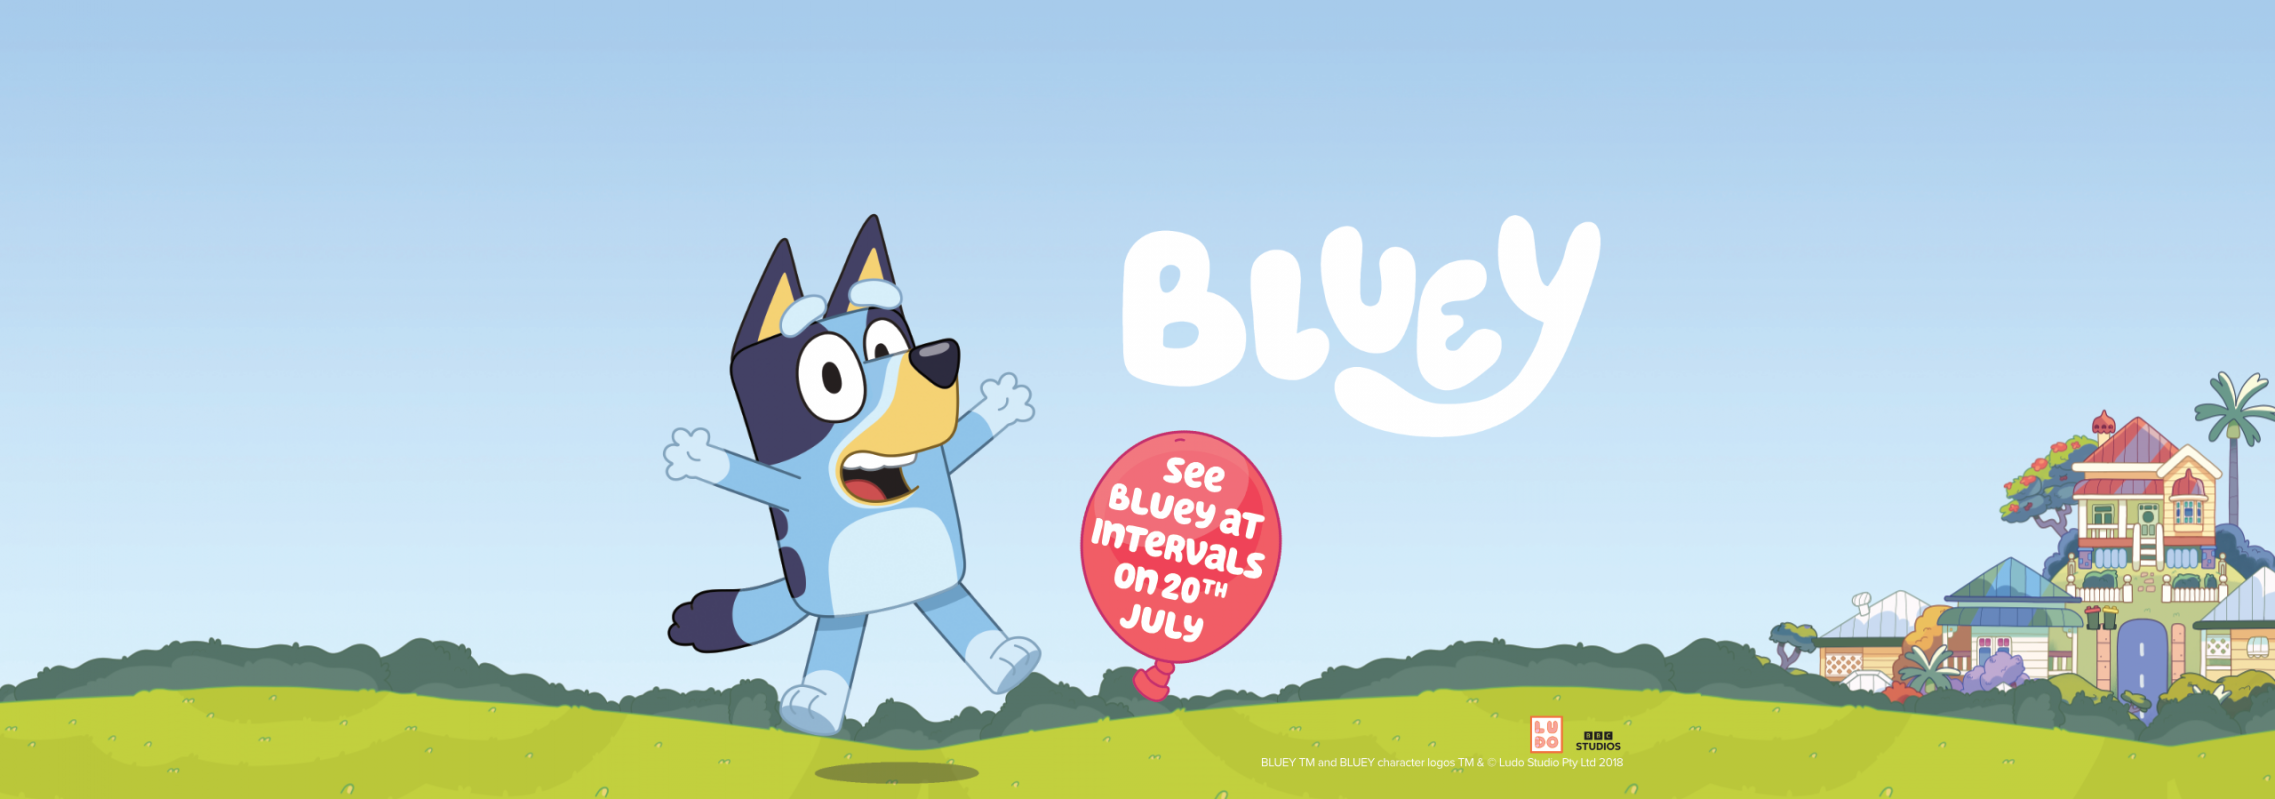 BM Bluey Website Homepage and Events Page Header_layout_007.png